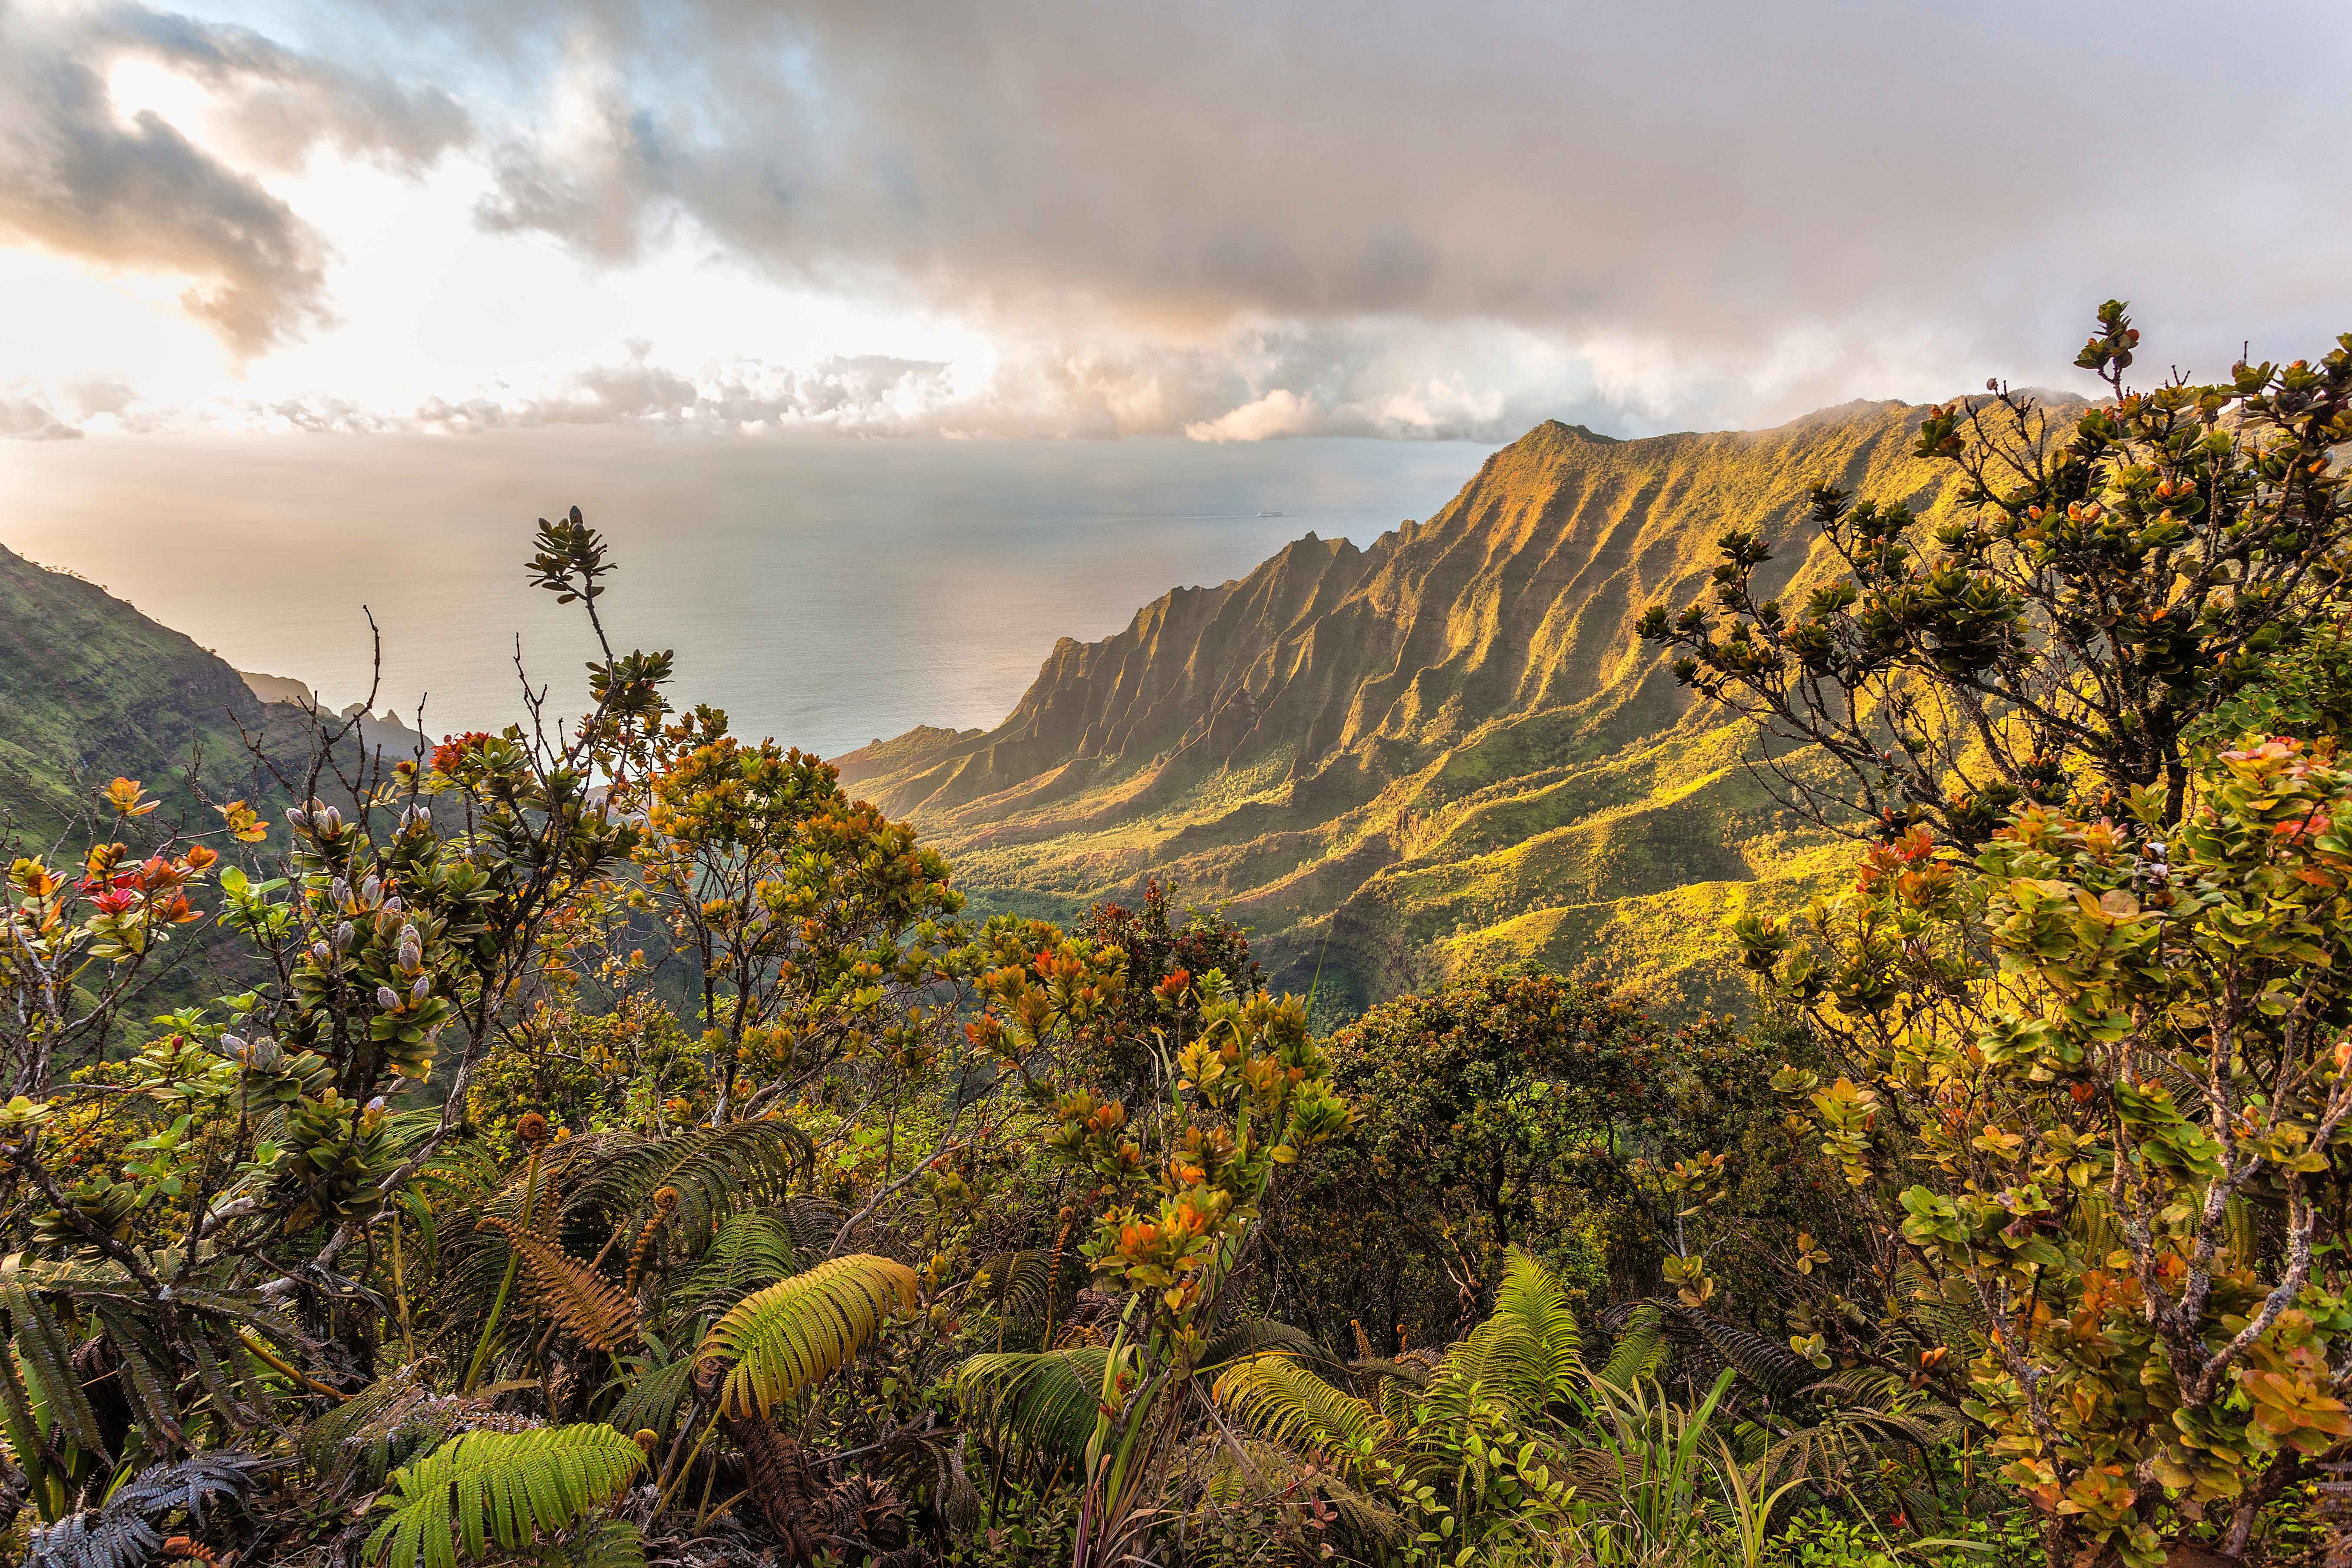 The famous view of the Kalalau Valley on Kauai. Image by Danita Delimont / Getty